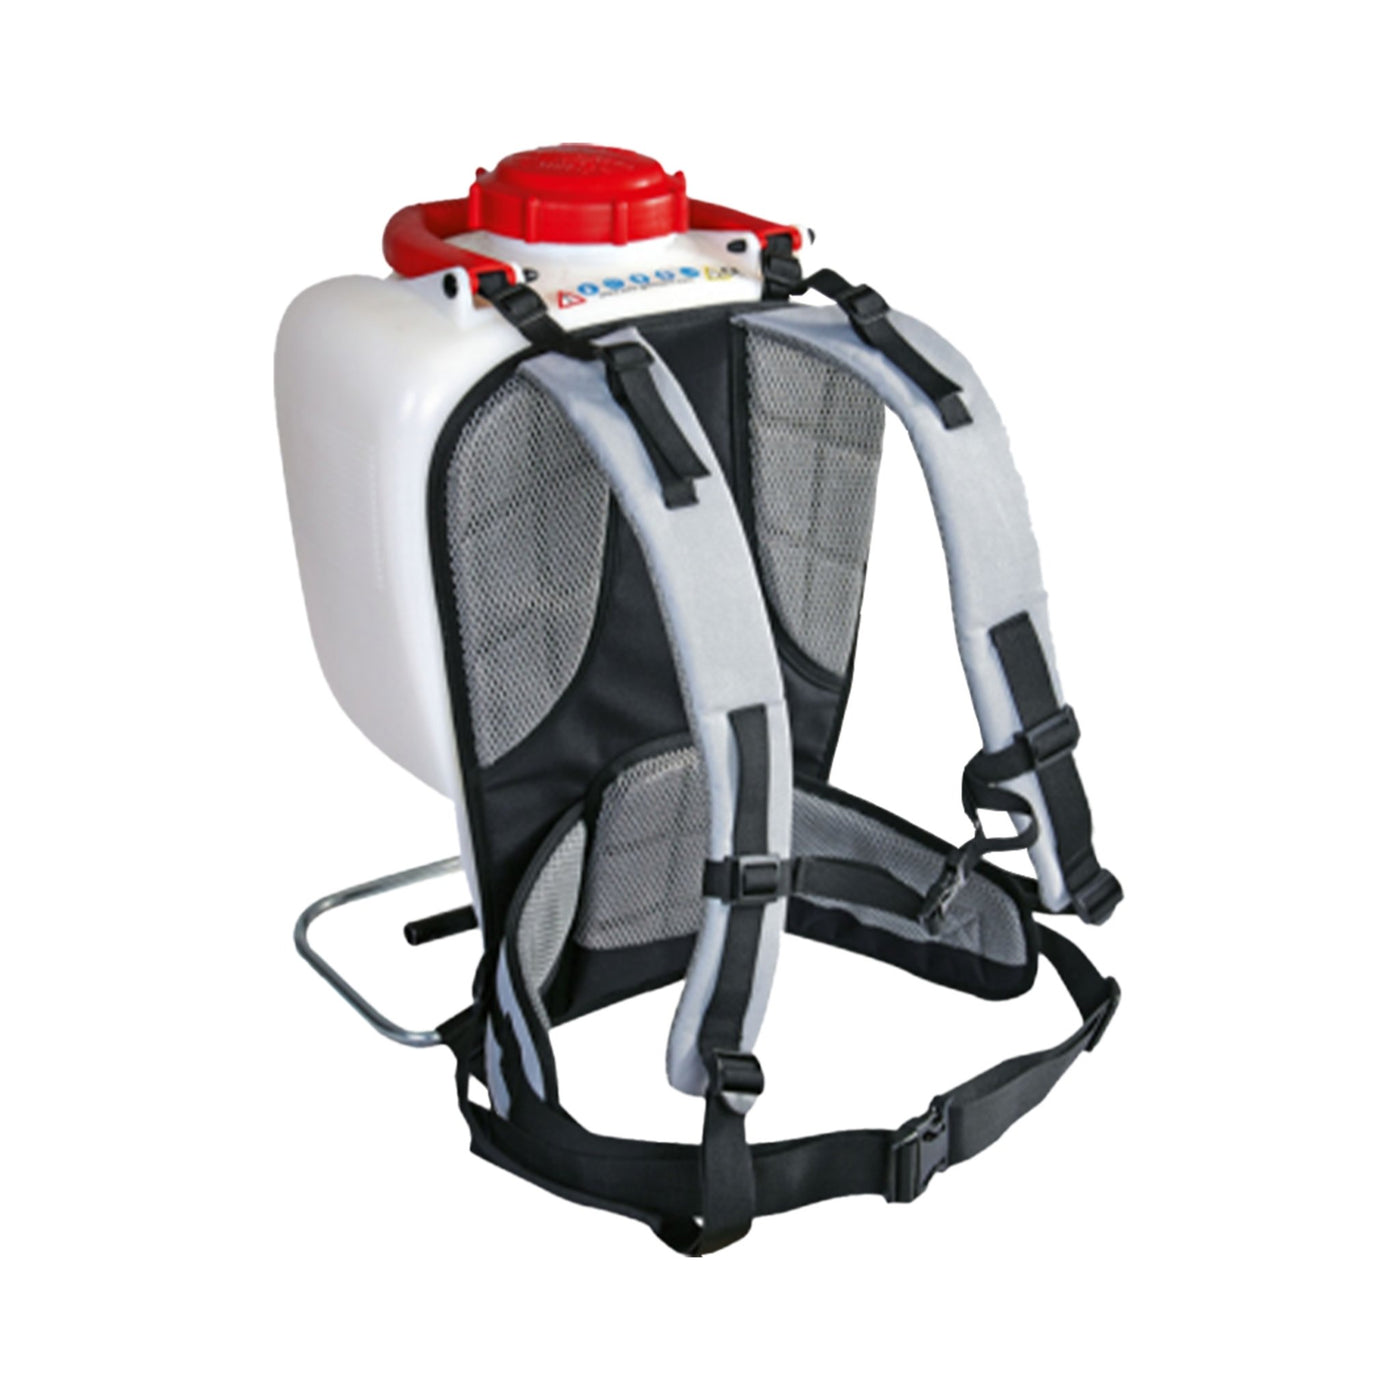 Pro backpack harness - Solo New Zealand